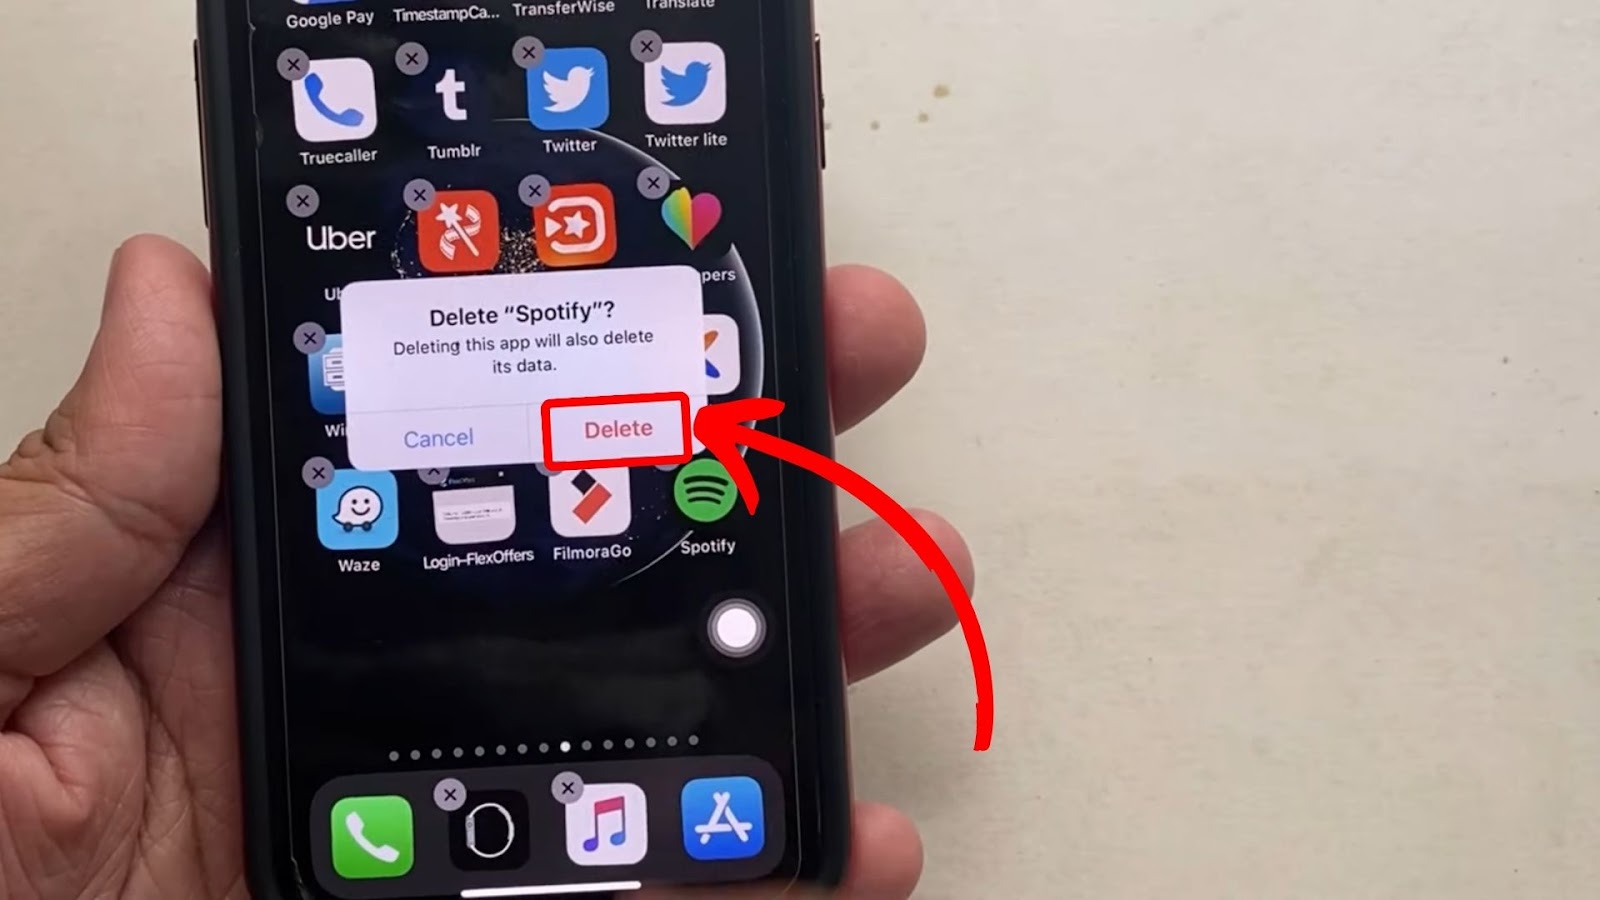 How To Delete Spotify on iPhone